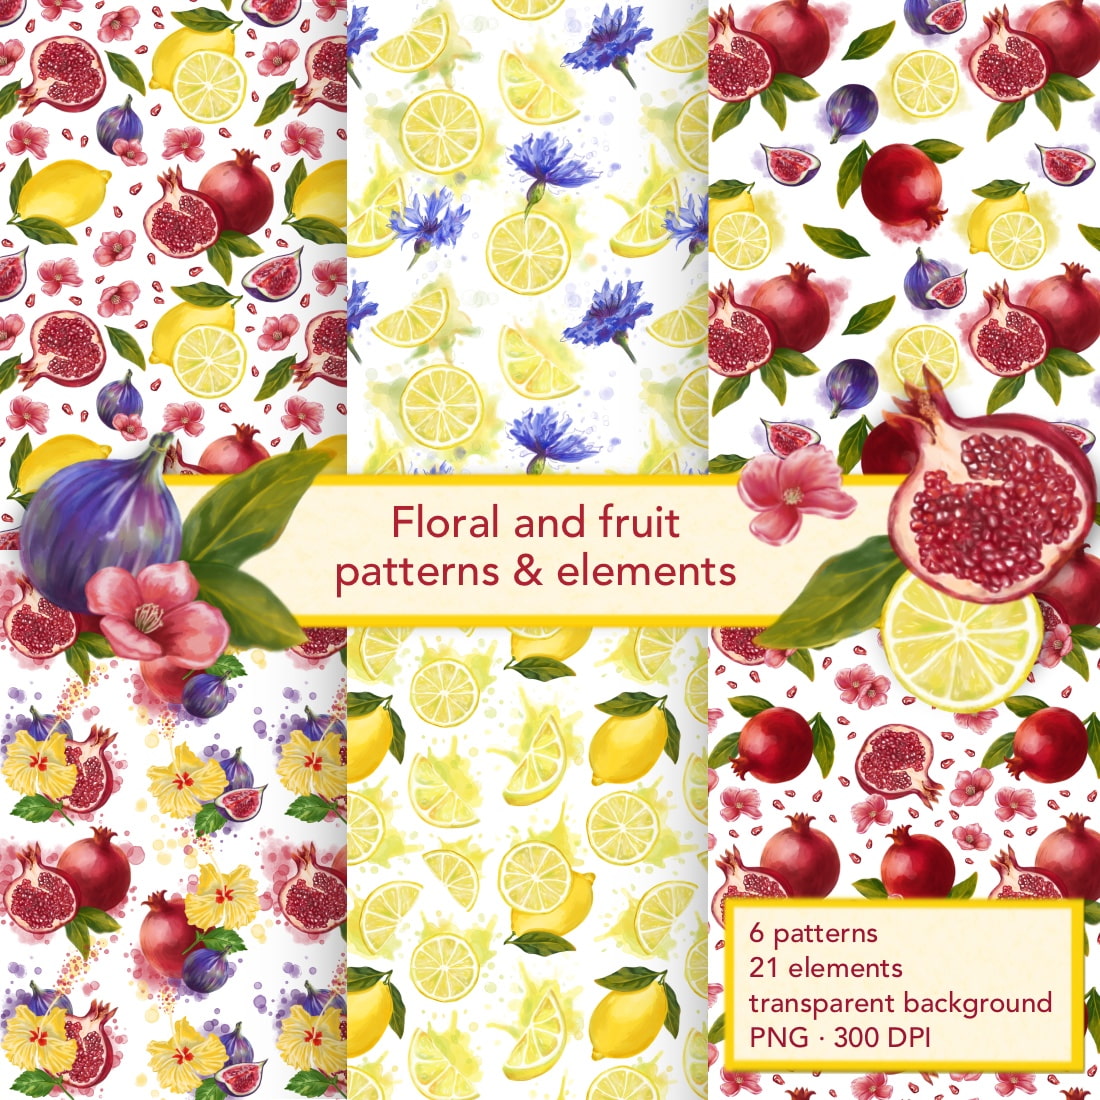 Floral and fruit patterns & elements cover image.